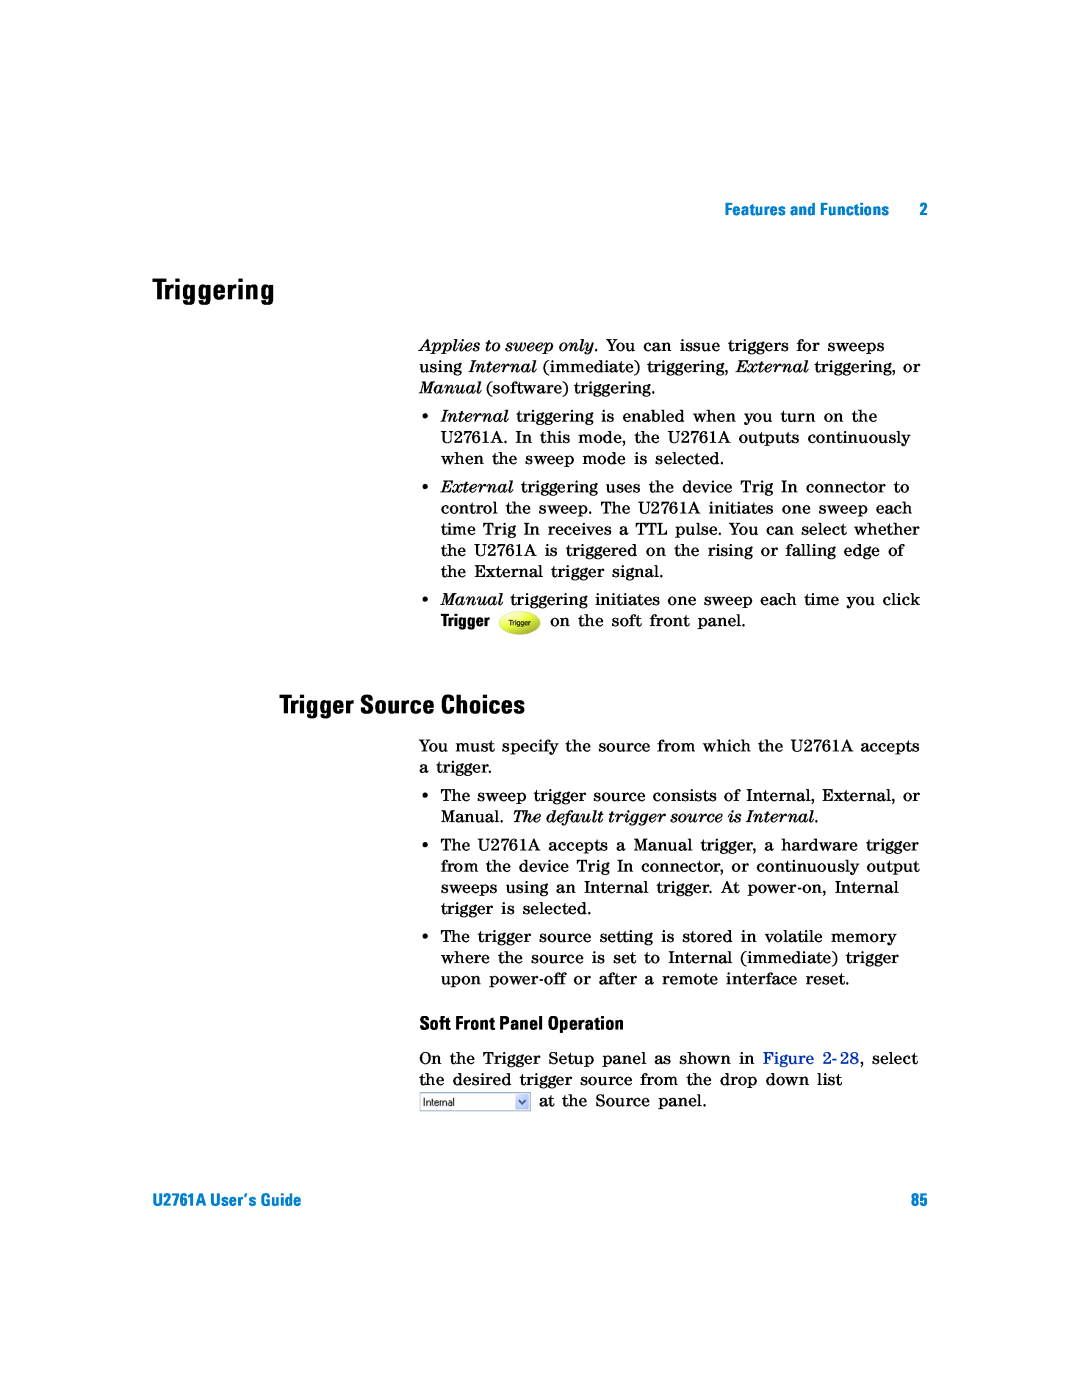 Agilent Technologies manual Triggering, Trigger Source Choices, Soft Front Panel Operation, U2761A User’s Guide 